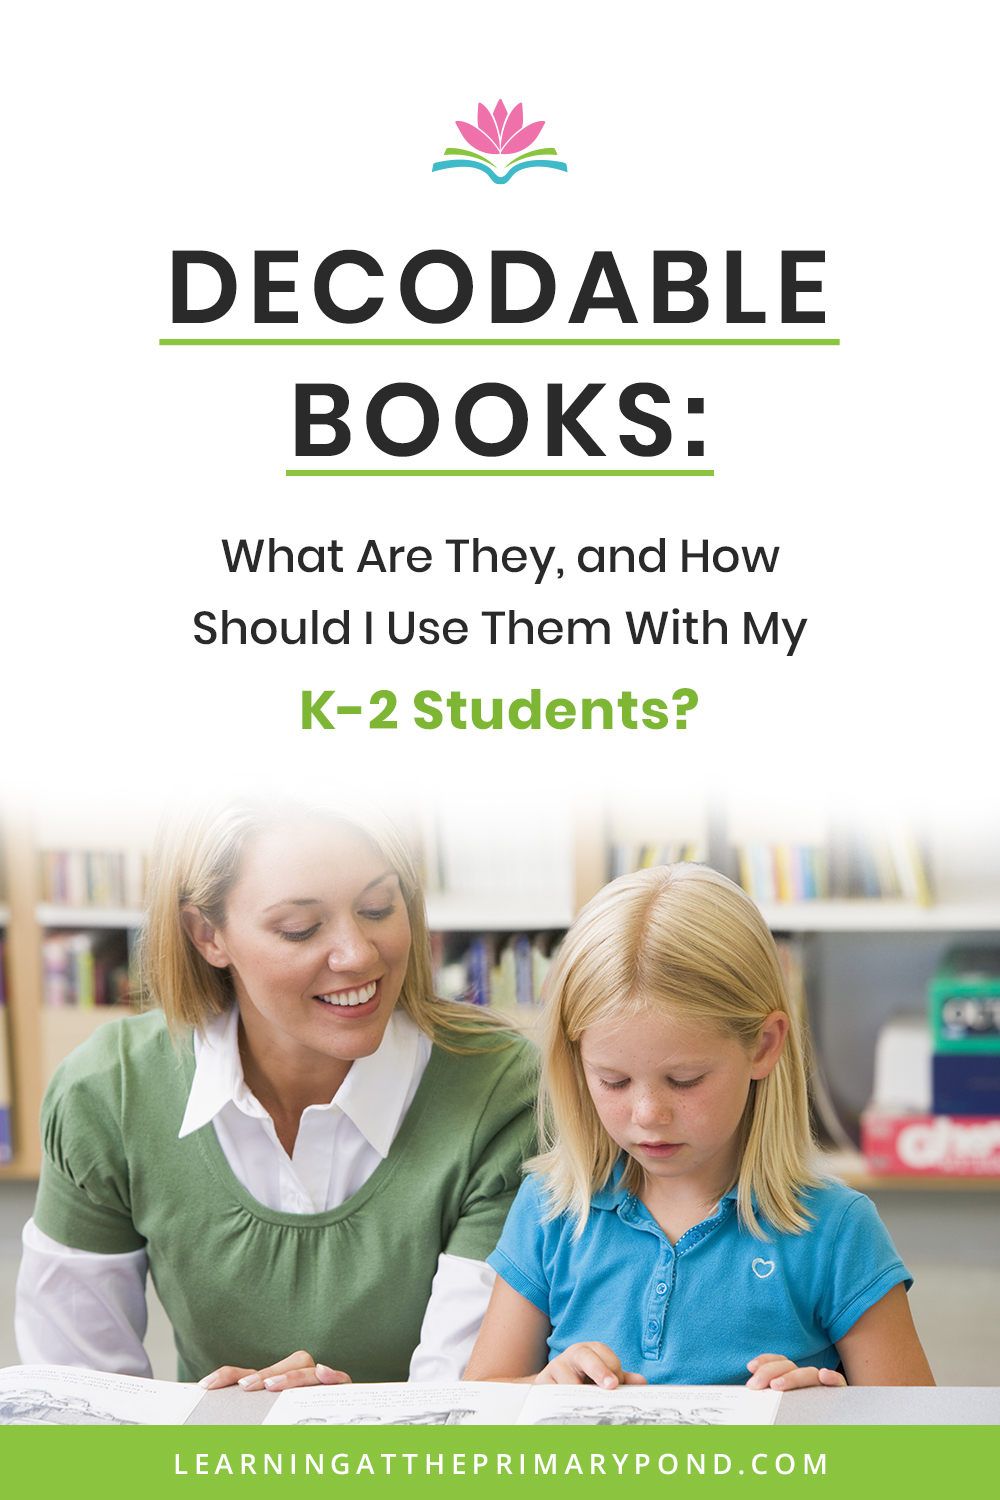 the-ultimate-guide-to-decodable-books-the-measured-mom